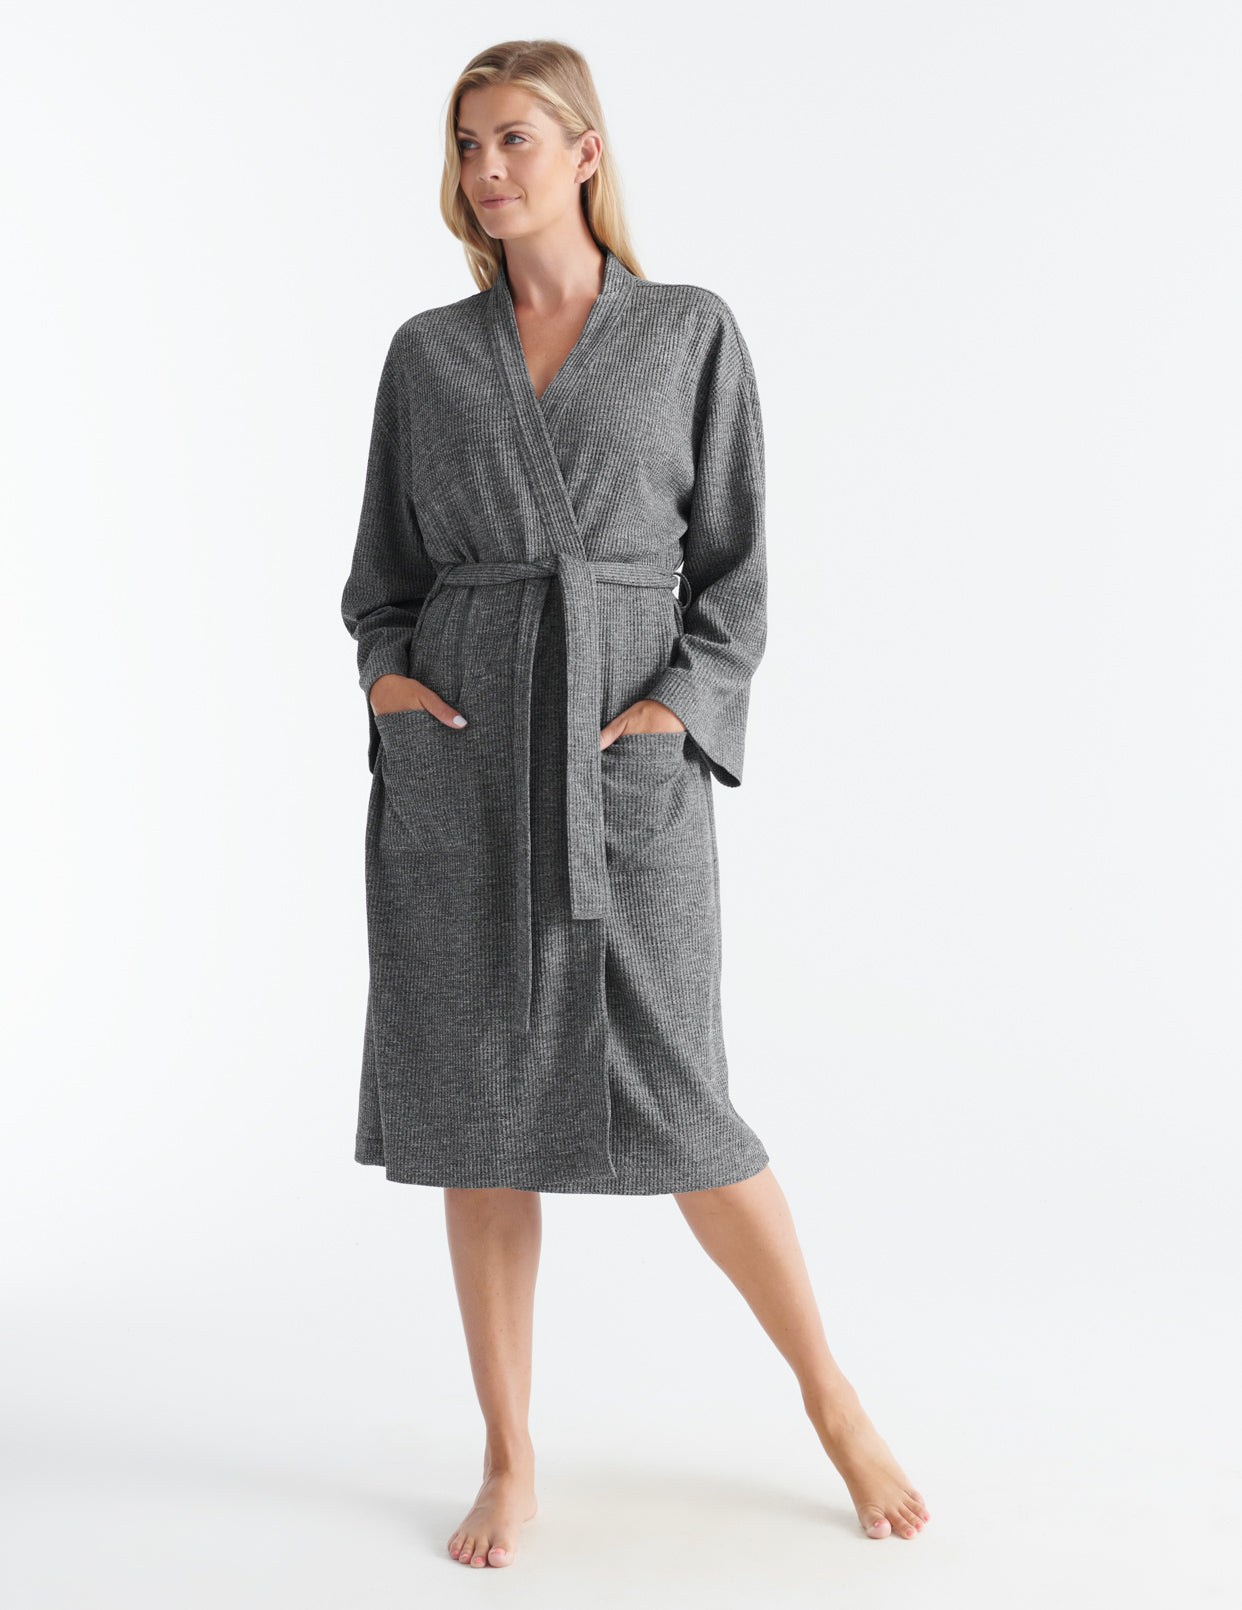 18 Best women's dressing gowns & robes starting from £30